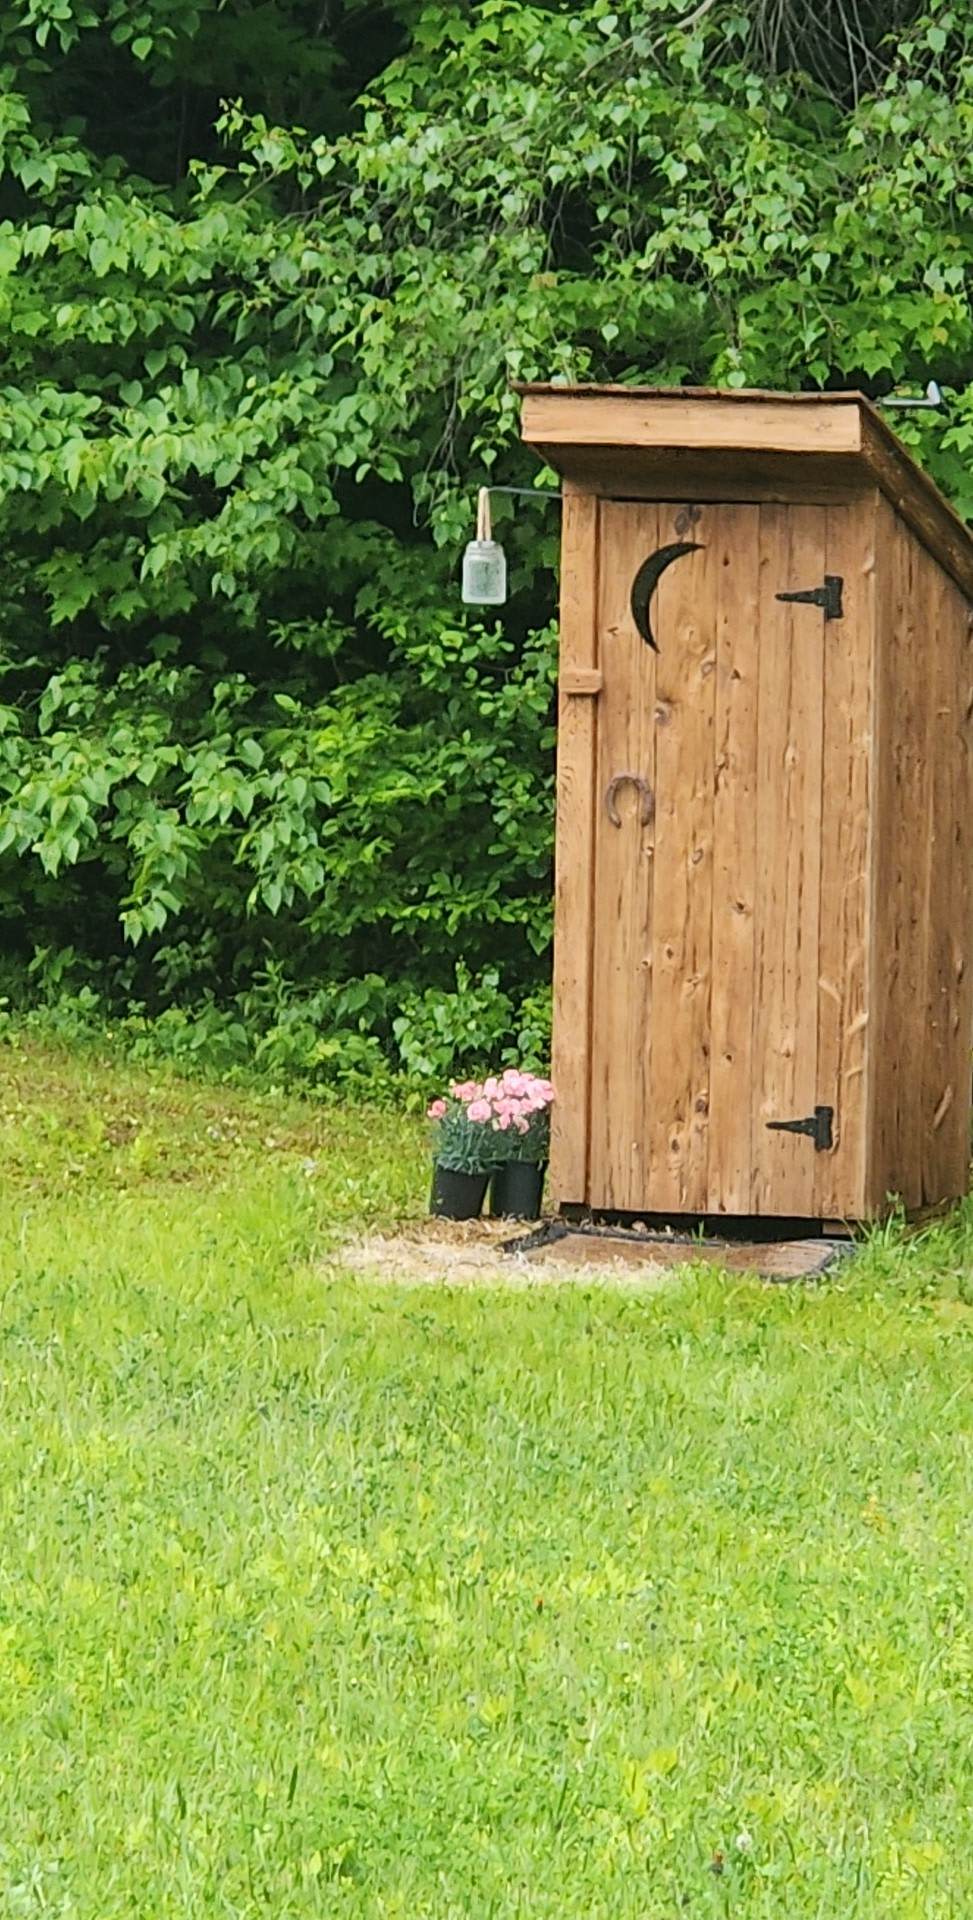 We have a charming outhouse, stocked with solar lighting for even nighttime ease. 